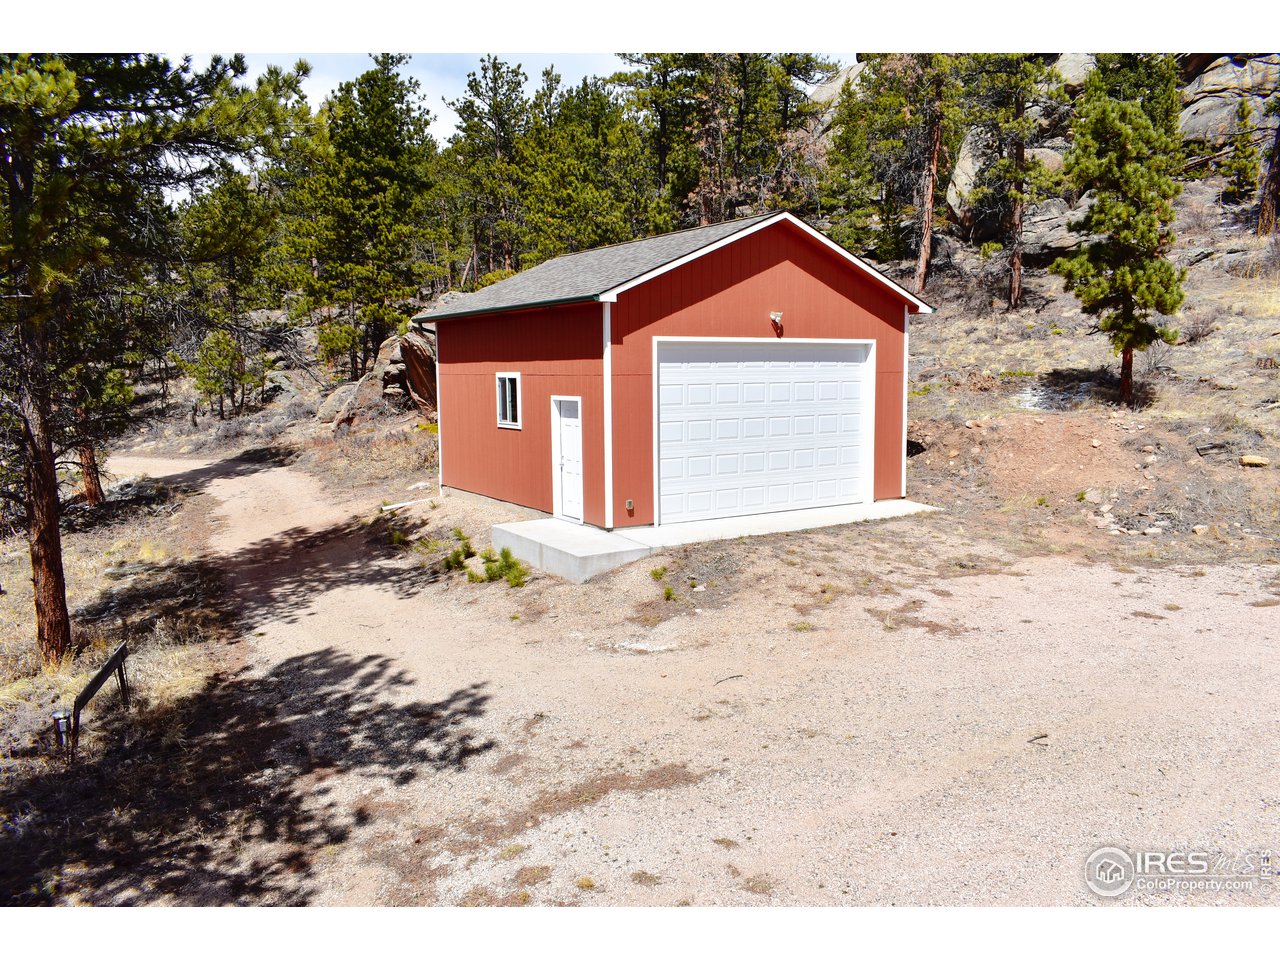 Permitted 528 square footage detached garage on slab with 220 and own panel box